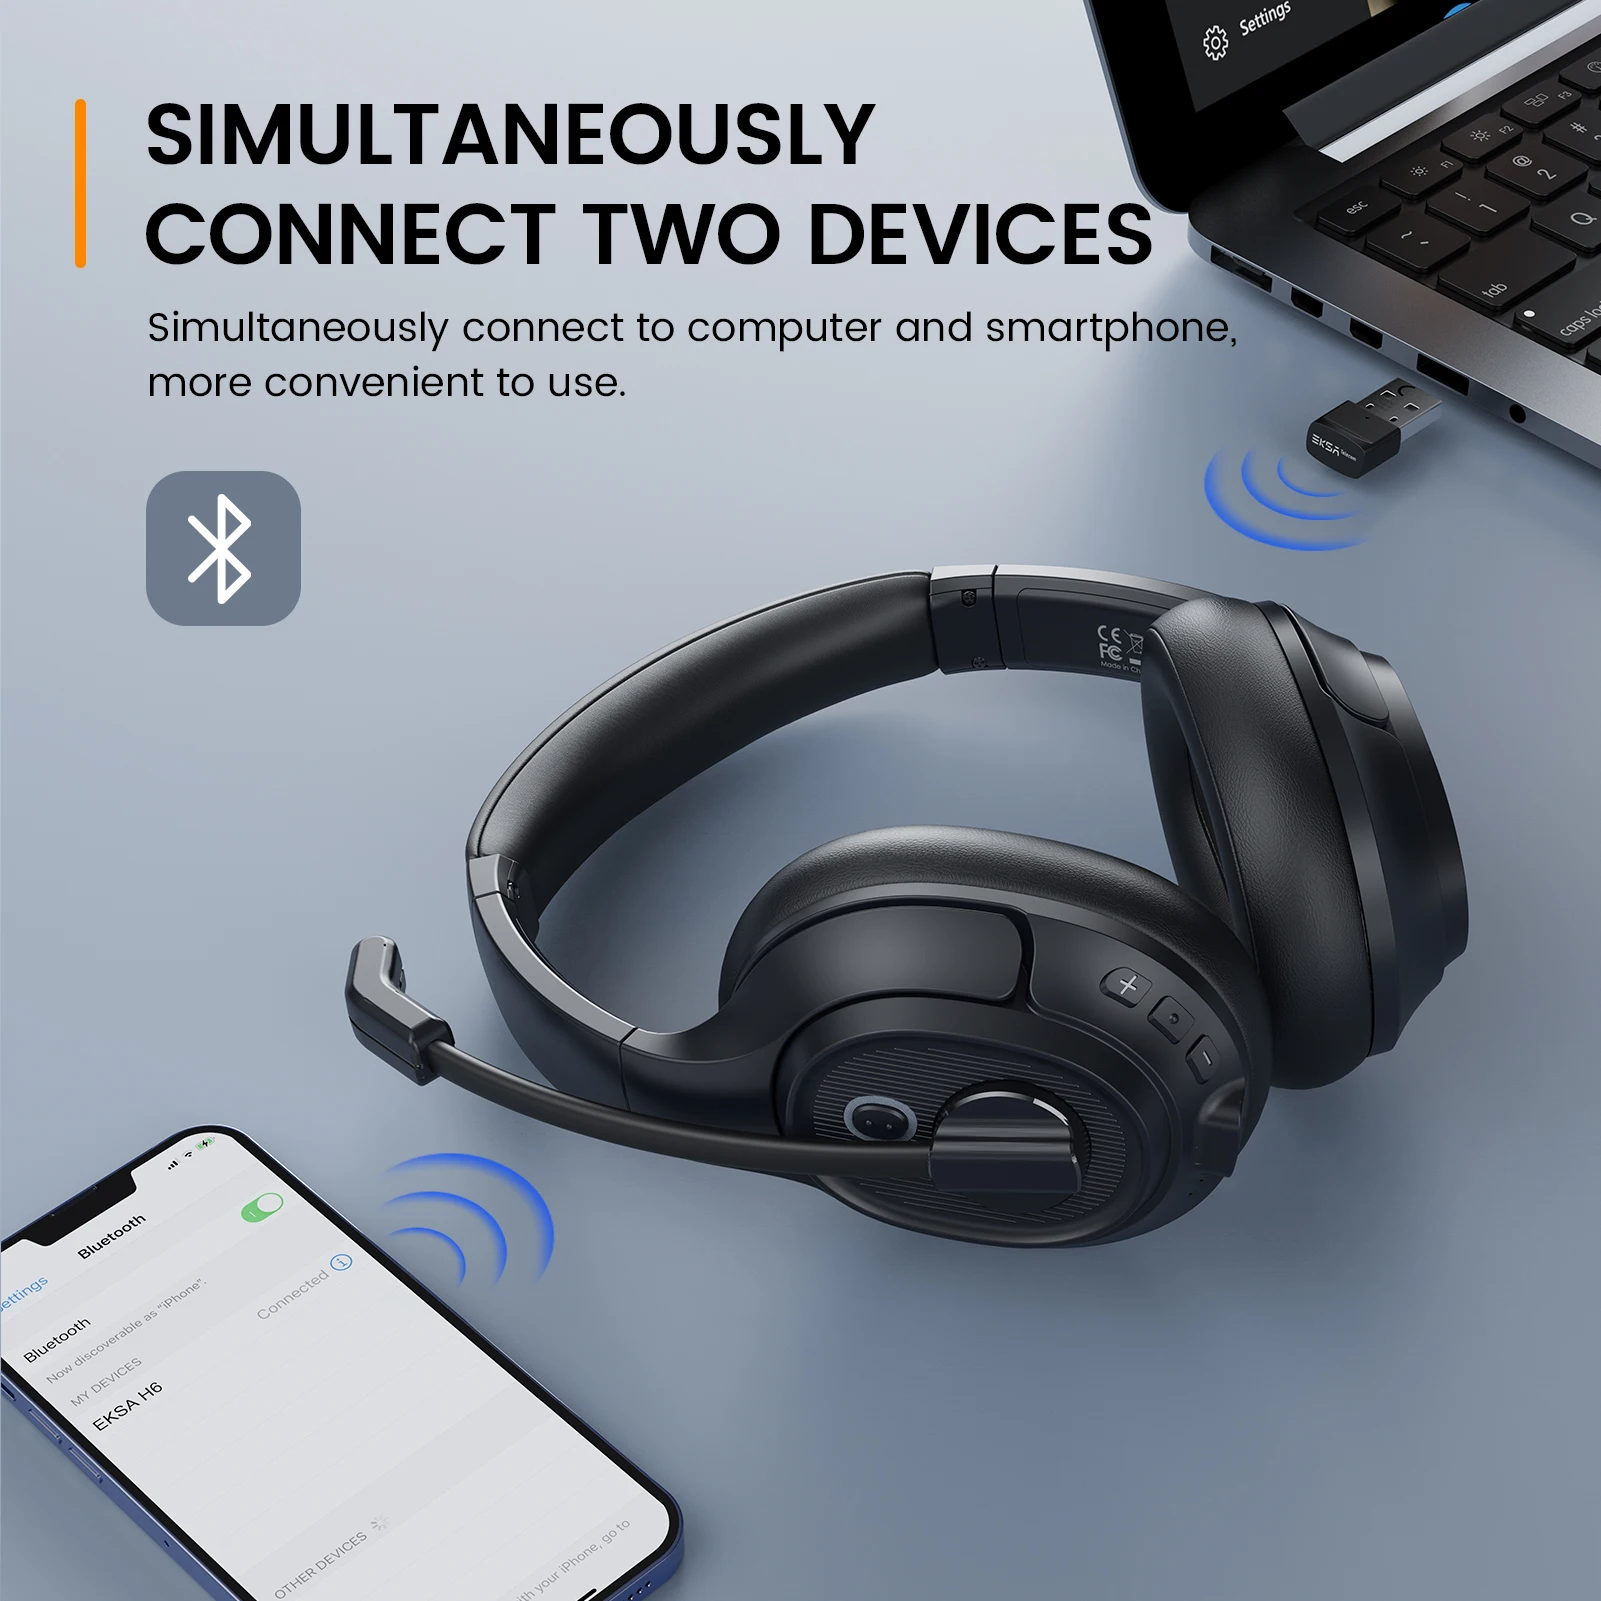 EKSA Wireless Headphones With Microphone Ai ENC Noise Cancelling Bluetooth 5.0 Office Driver Trunk Call Center Skype Headset H6 enlarge